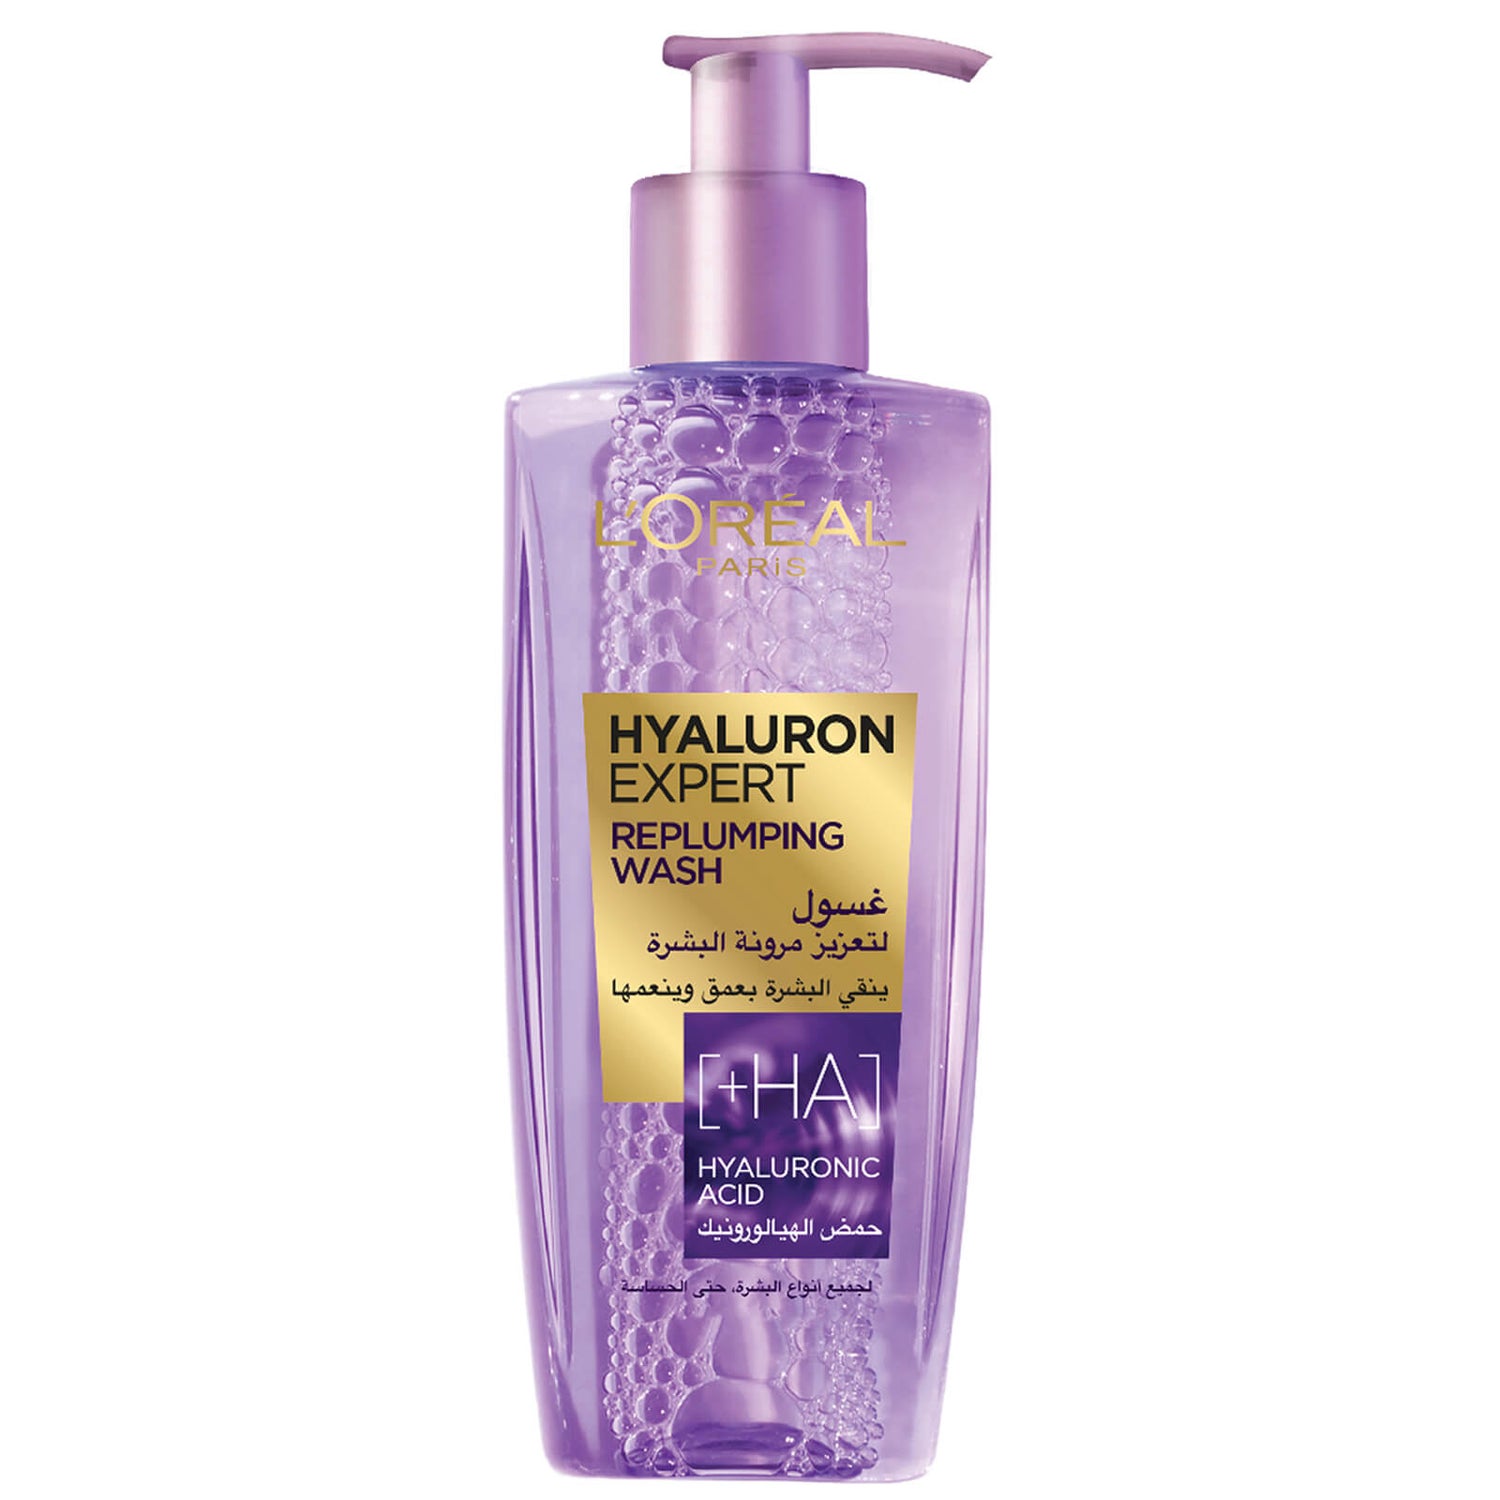 L'Oréal Paris Hyaluron Expert Replumping Face Wash with Hyaluronic Acid 200ml